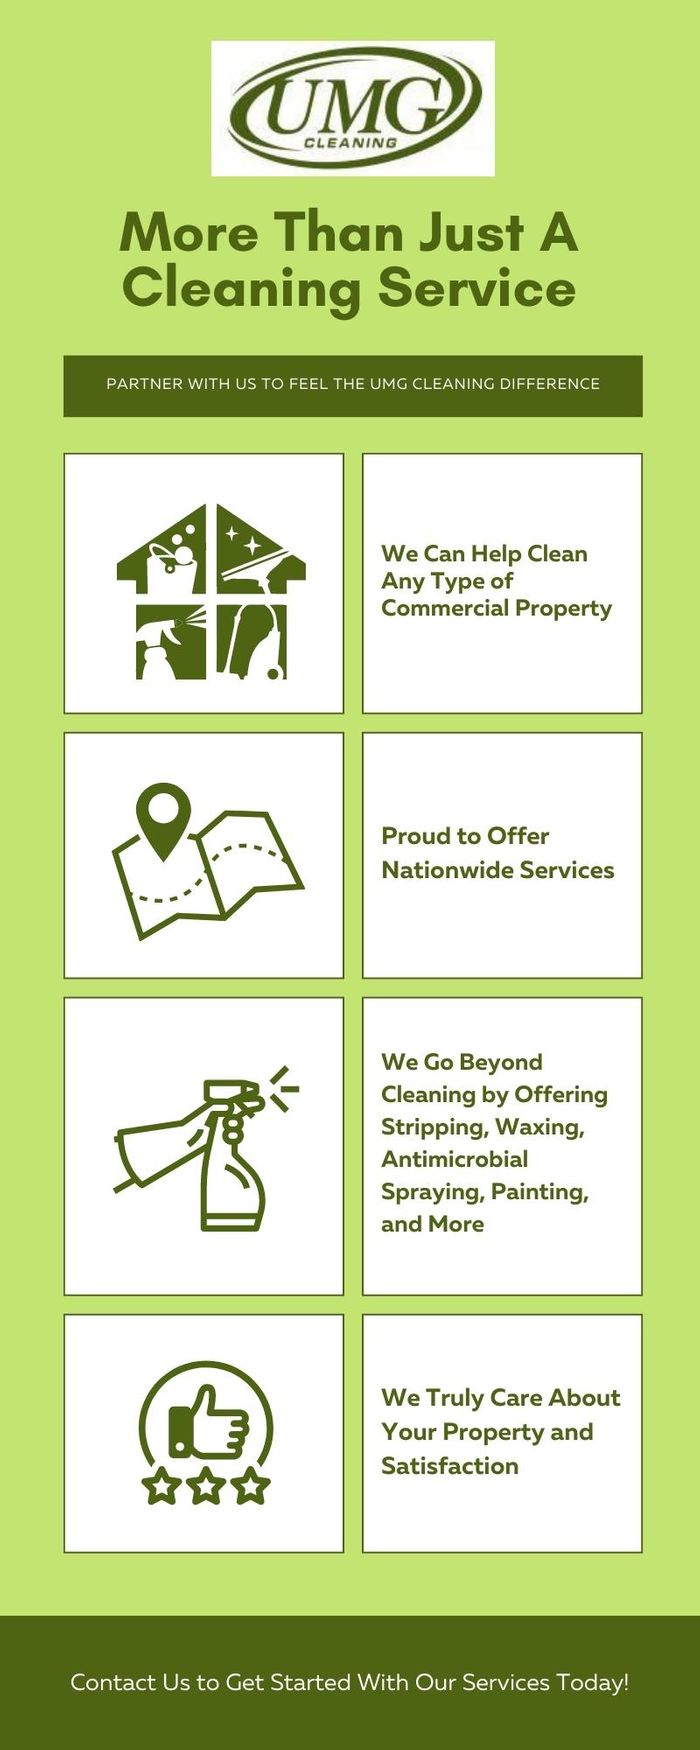 UMG Cleaning -More Than Just A Cleaning Service.jpg